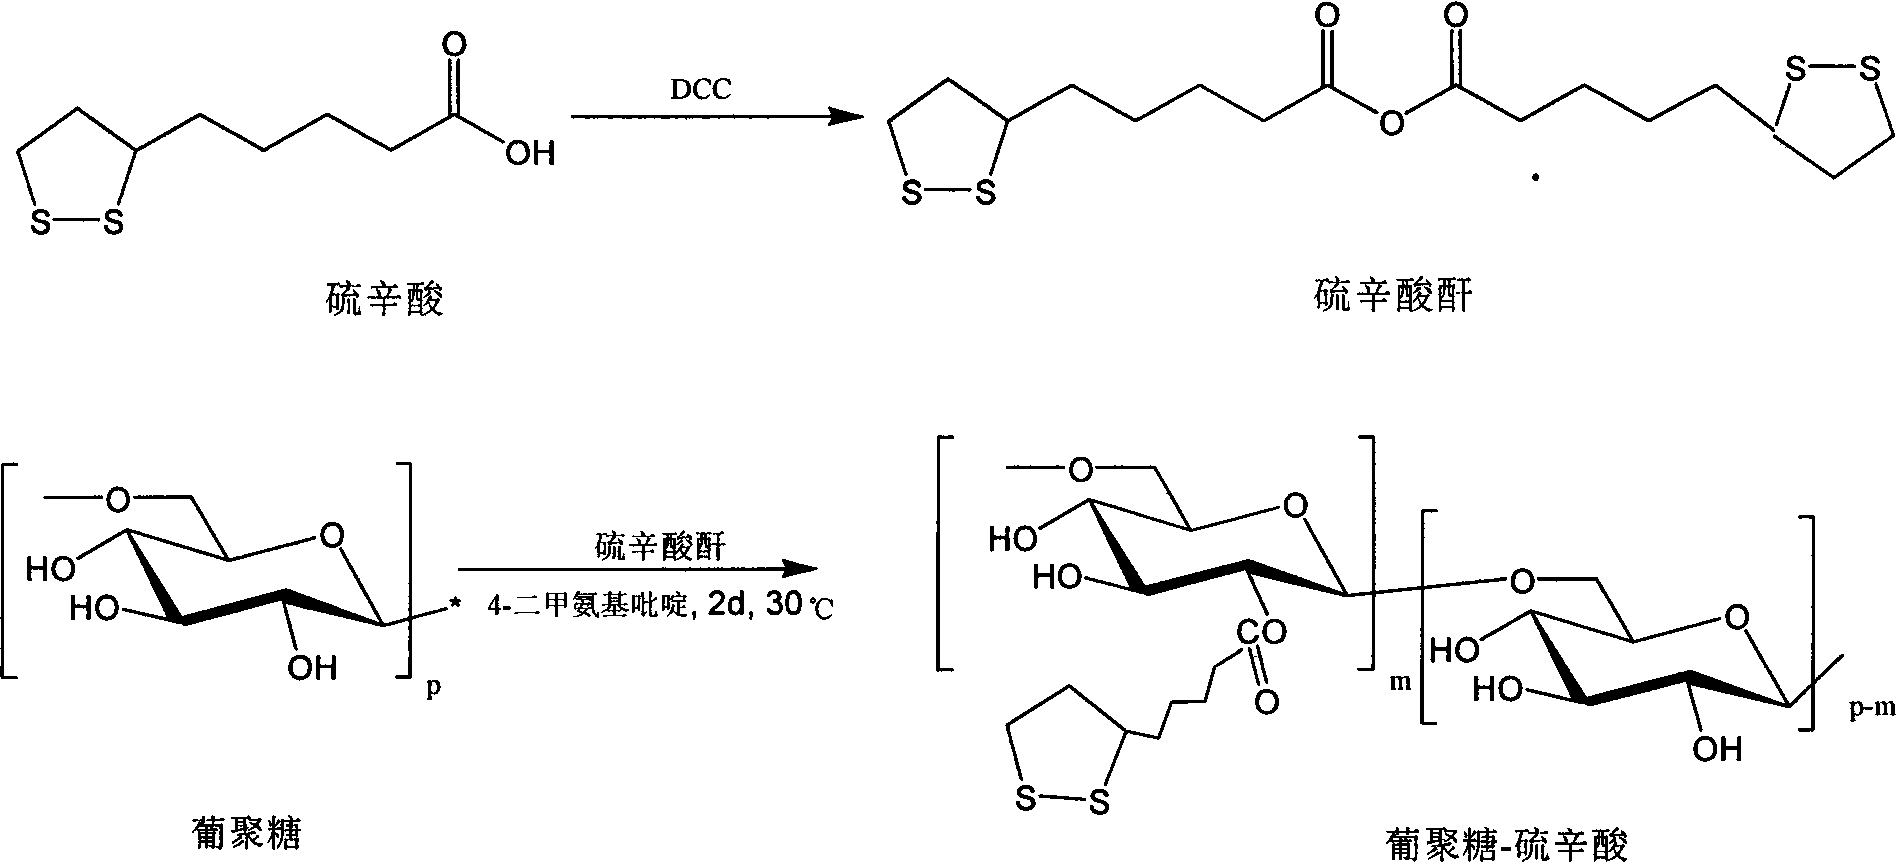 Hydrophilic polymer the side chain of which is modified by lipoic acid and preparation and application thereof